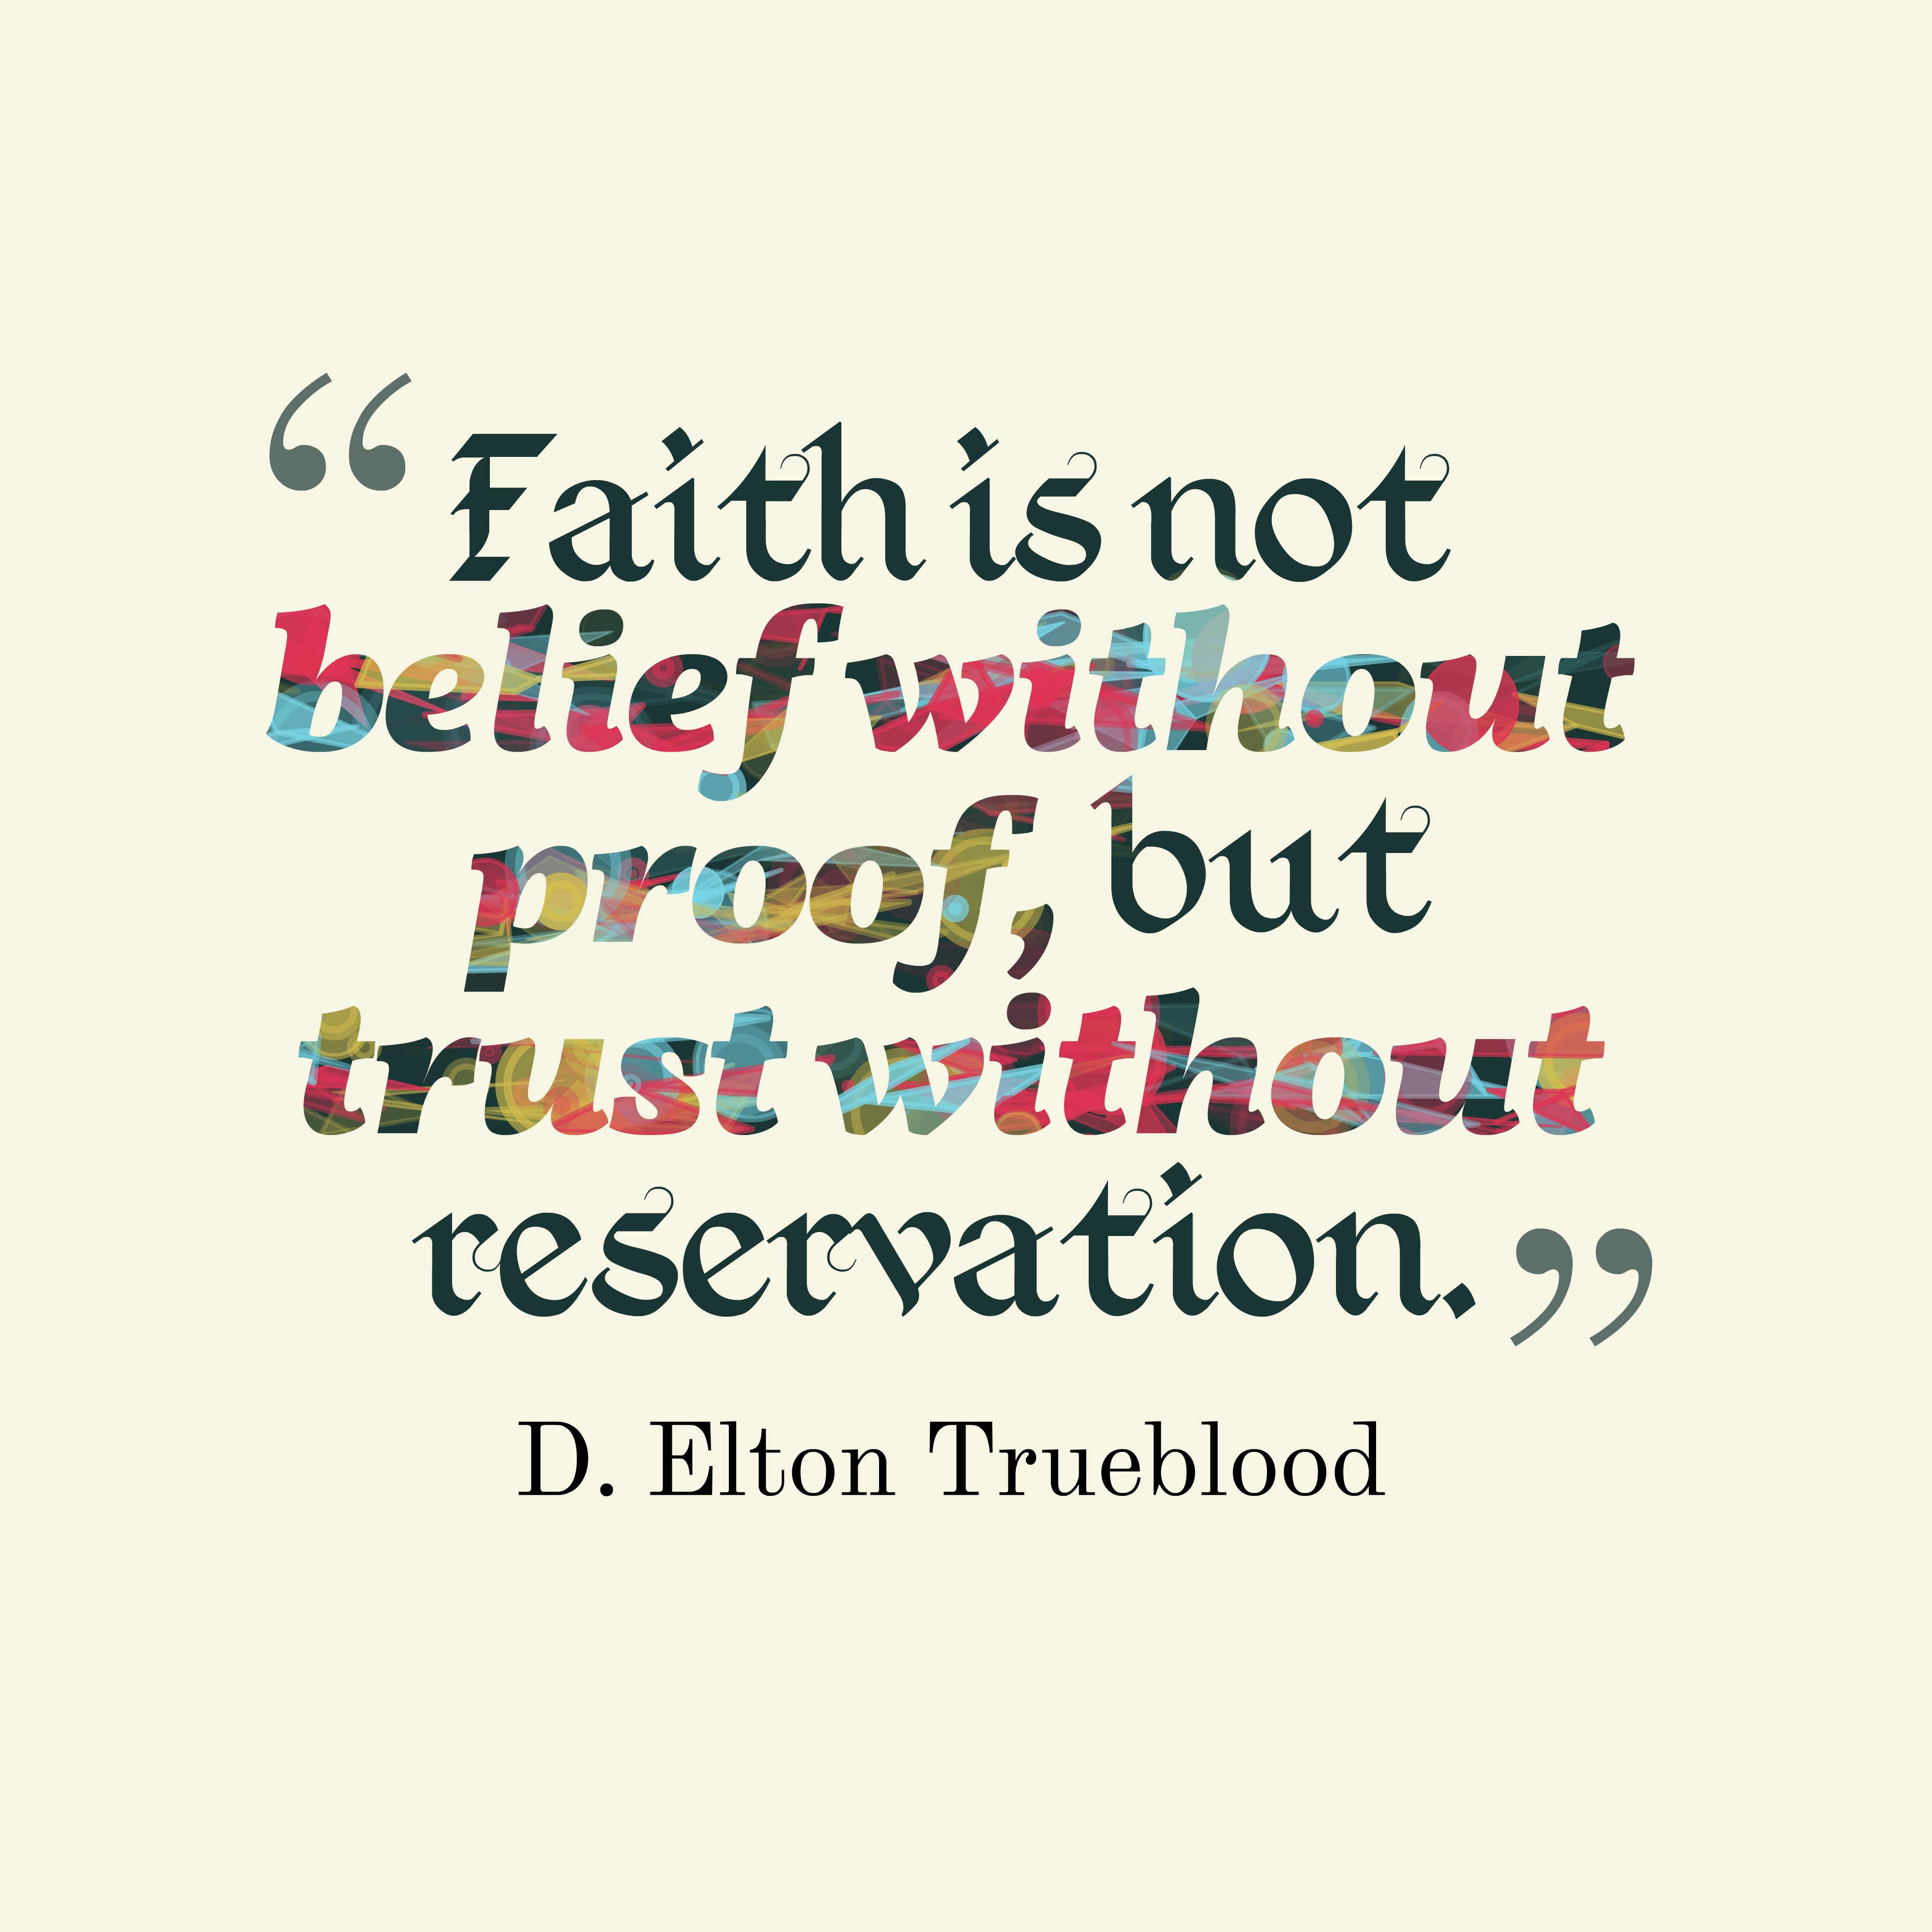 faith is not belief without proof, but trust without reservation.